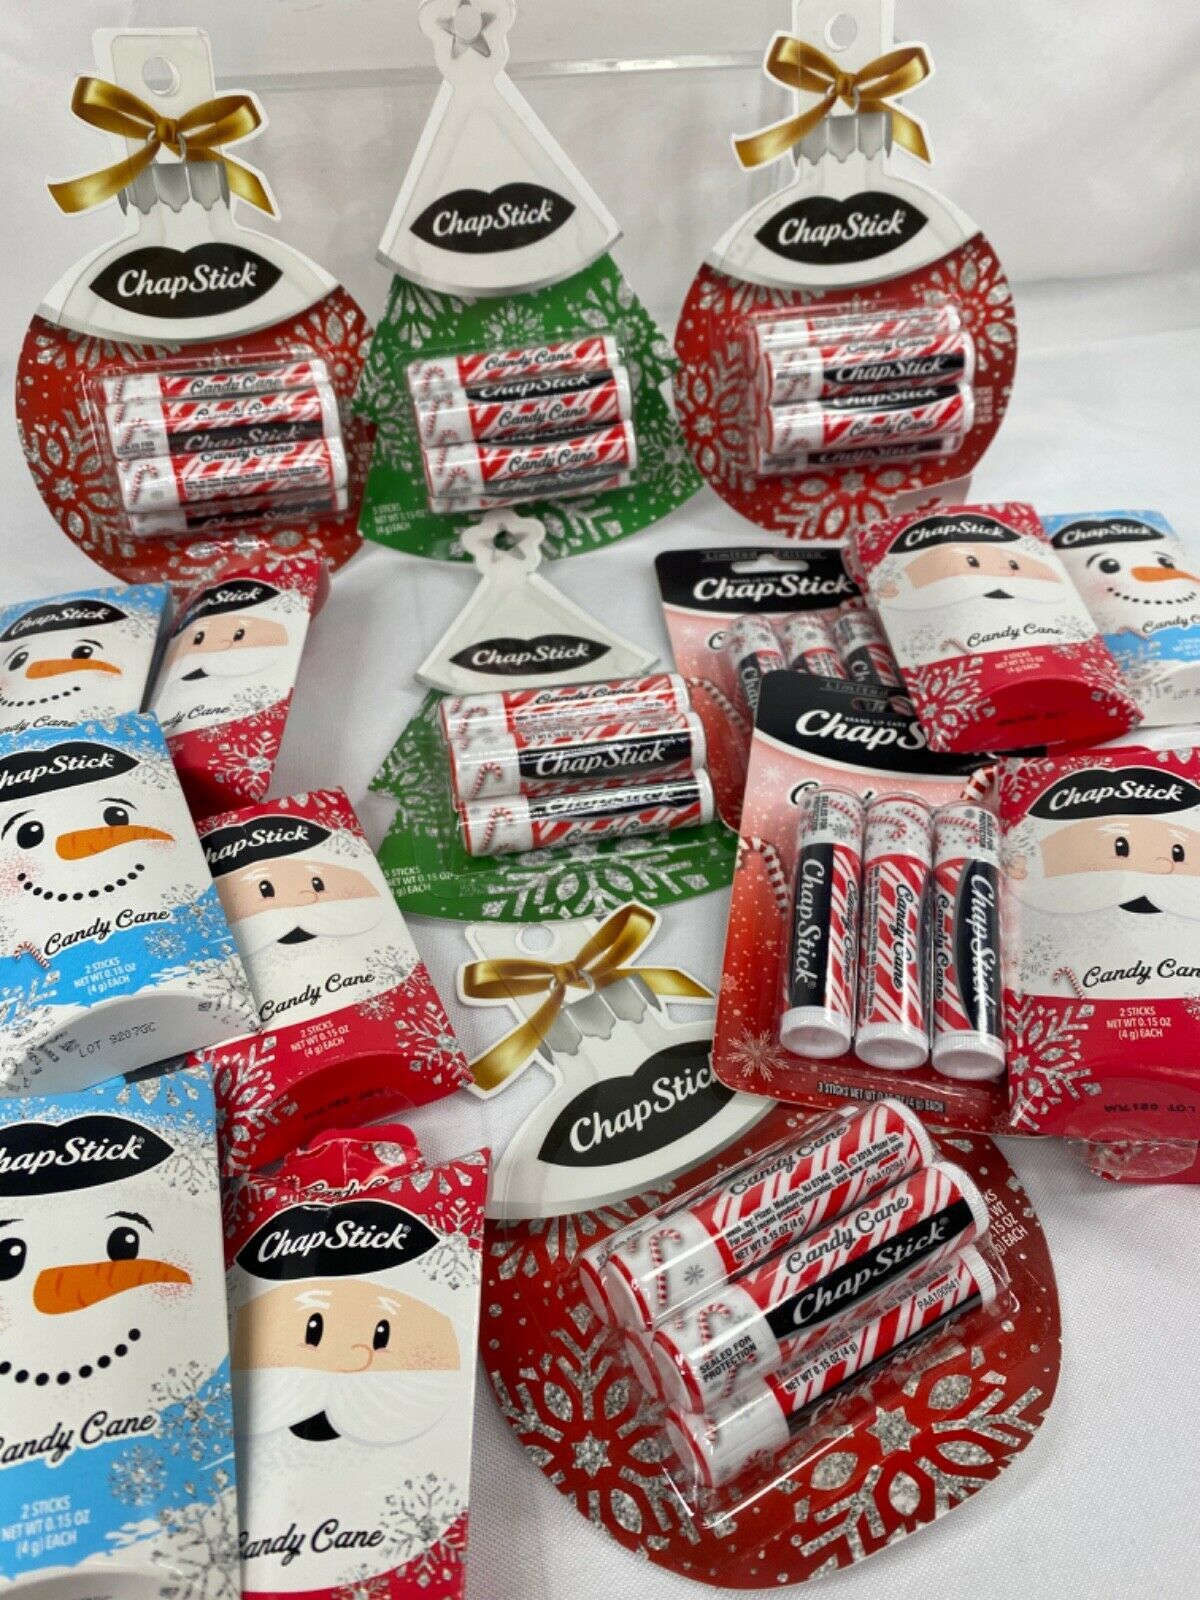 ChapStick Holiday Candy Cane Gift Set YOU CHOOSE Buy More Save +Combine Shipping - $2.84 - $3.79